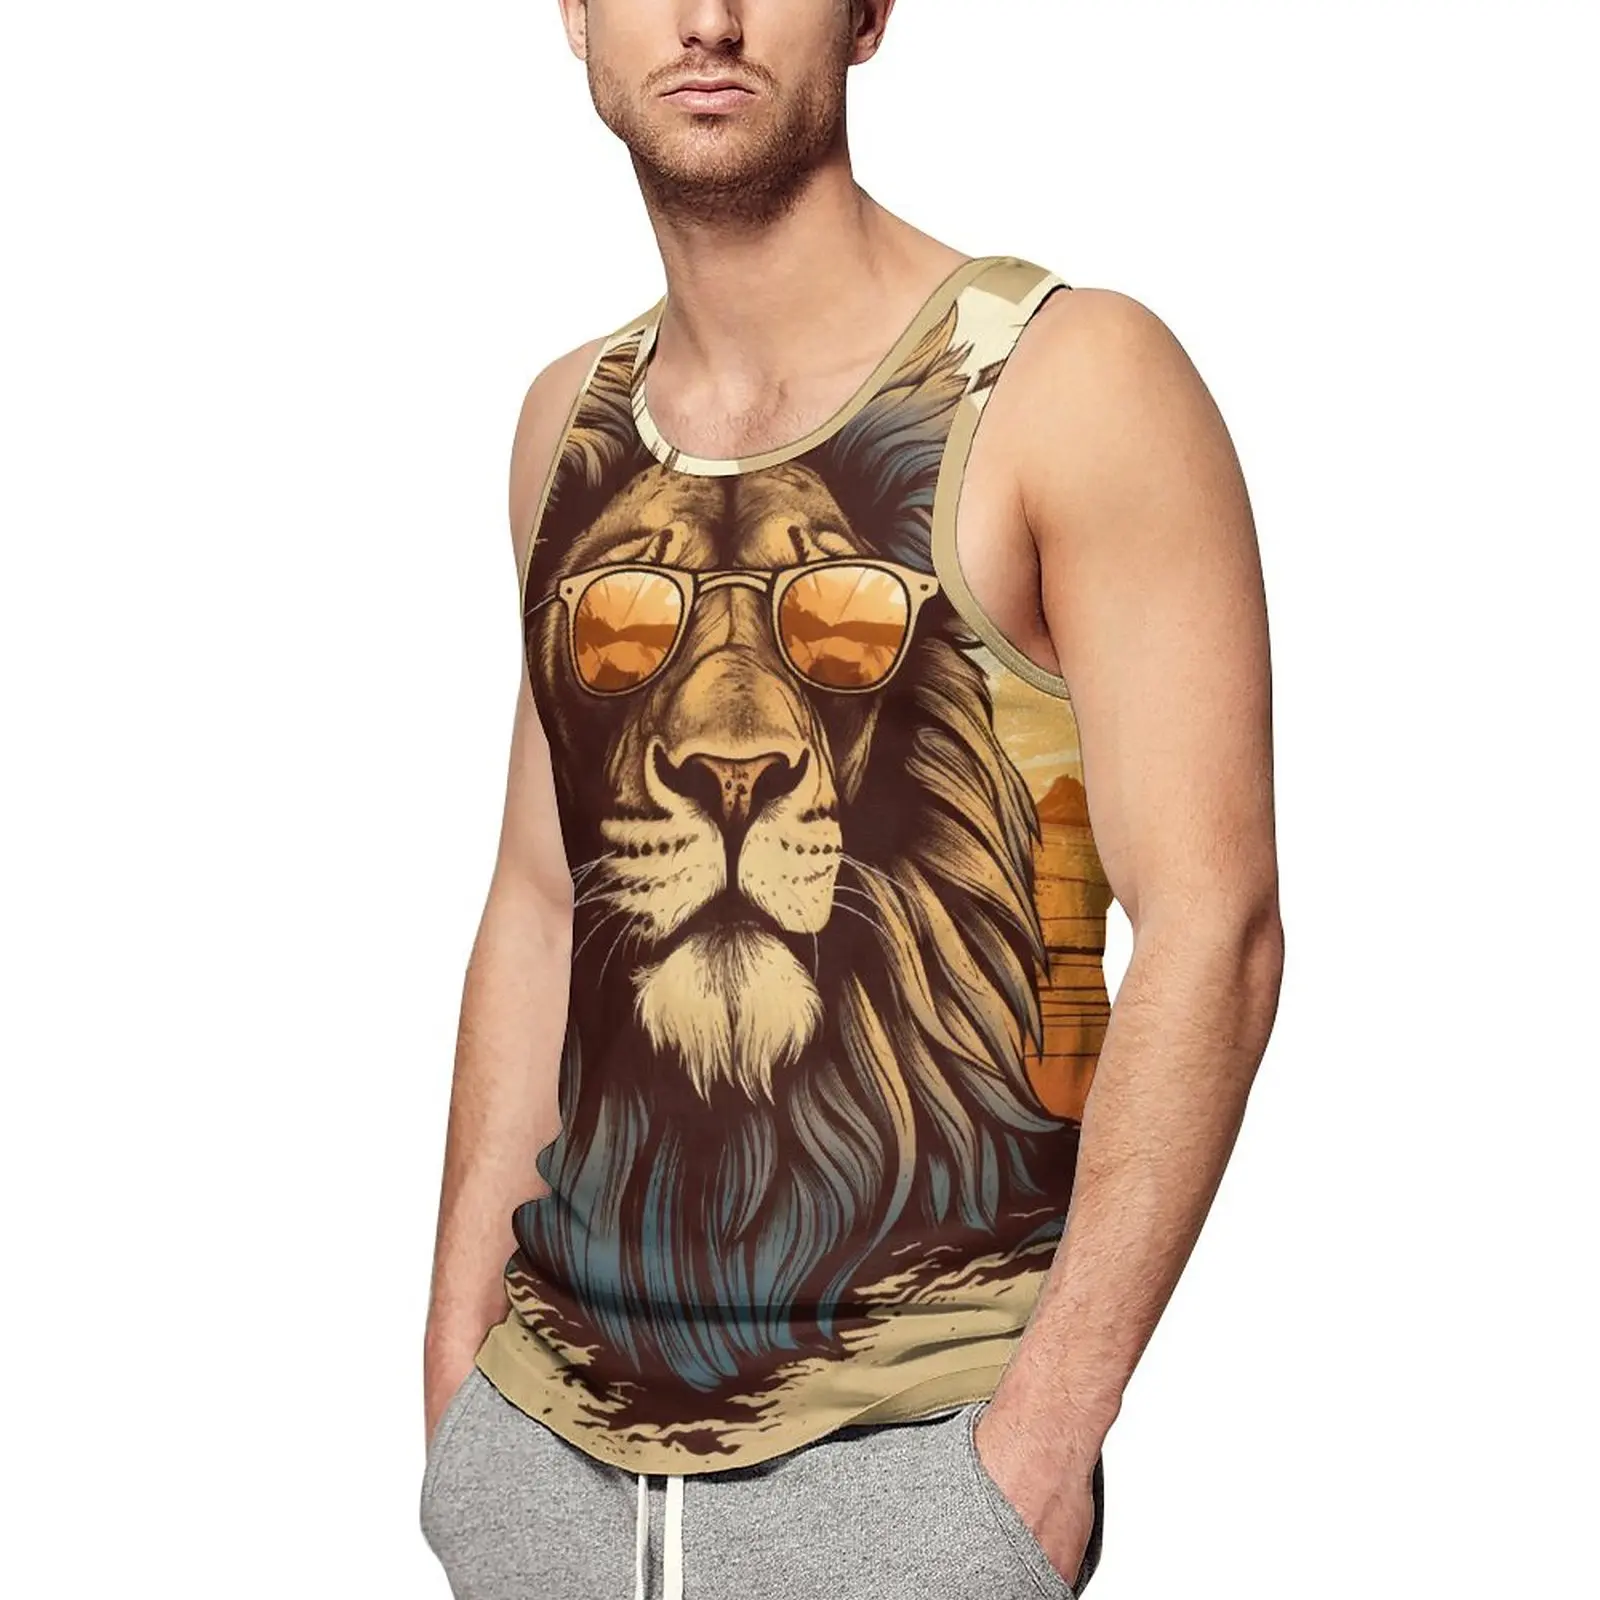 

Lion Summer Tank Top Retro Sunset Animals With Sunglasses Bodybuilding Tops Man Printed Muscle Sleeveless Vests Big Size